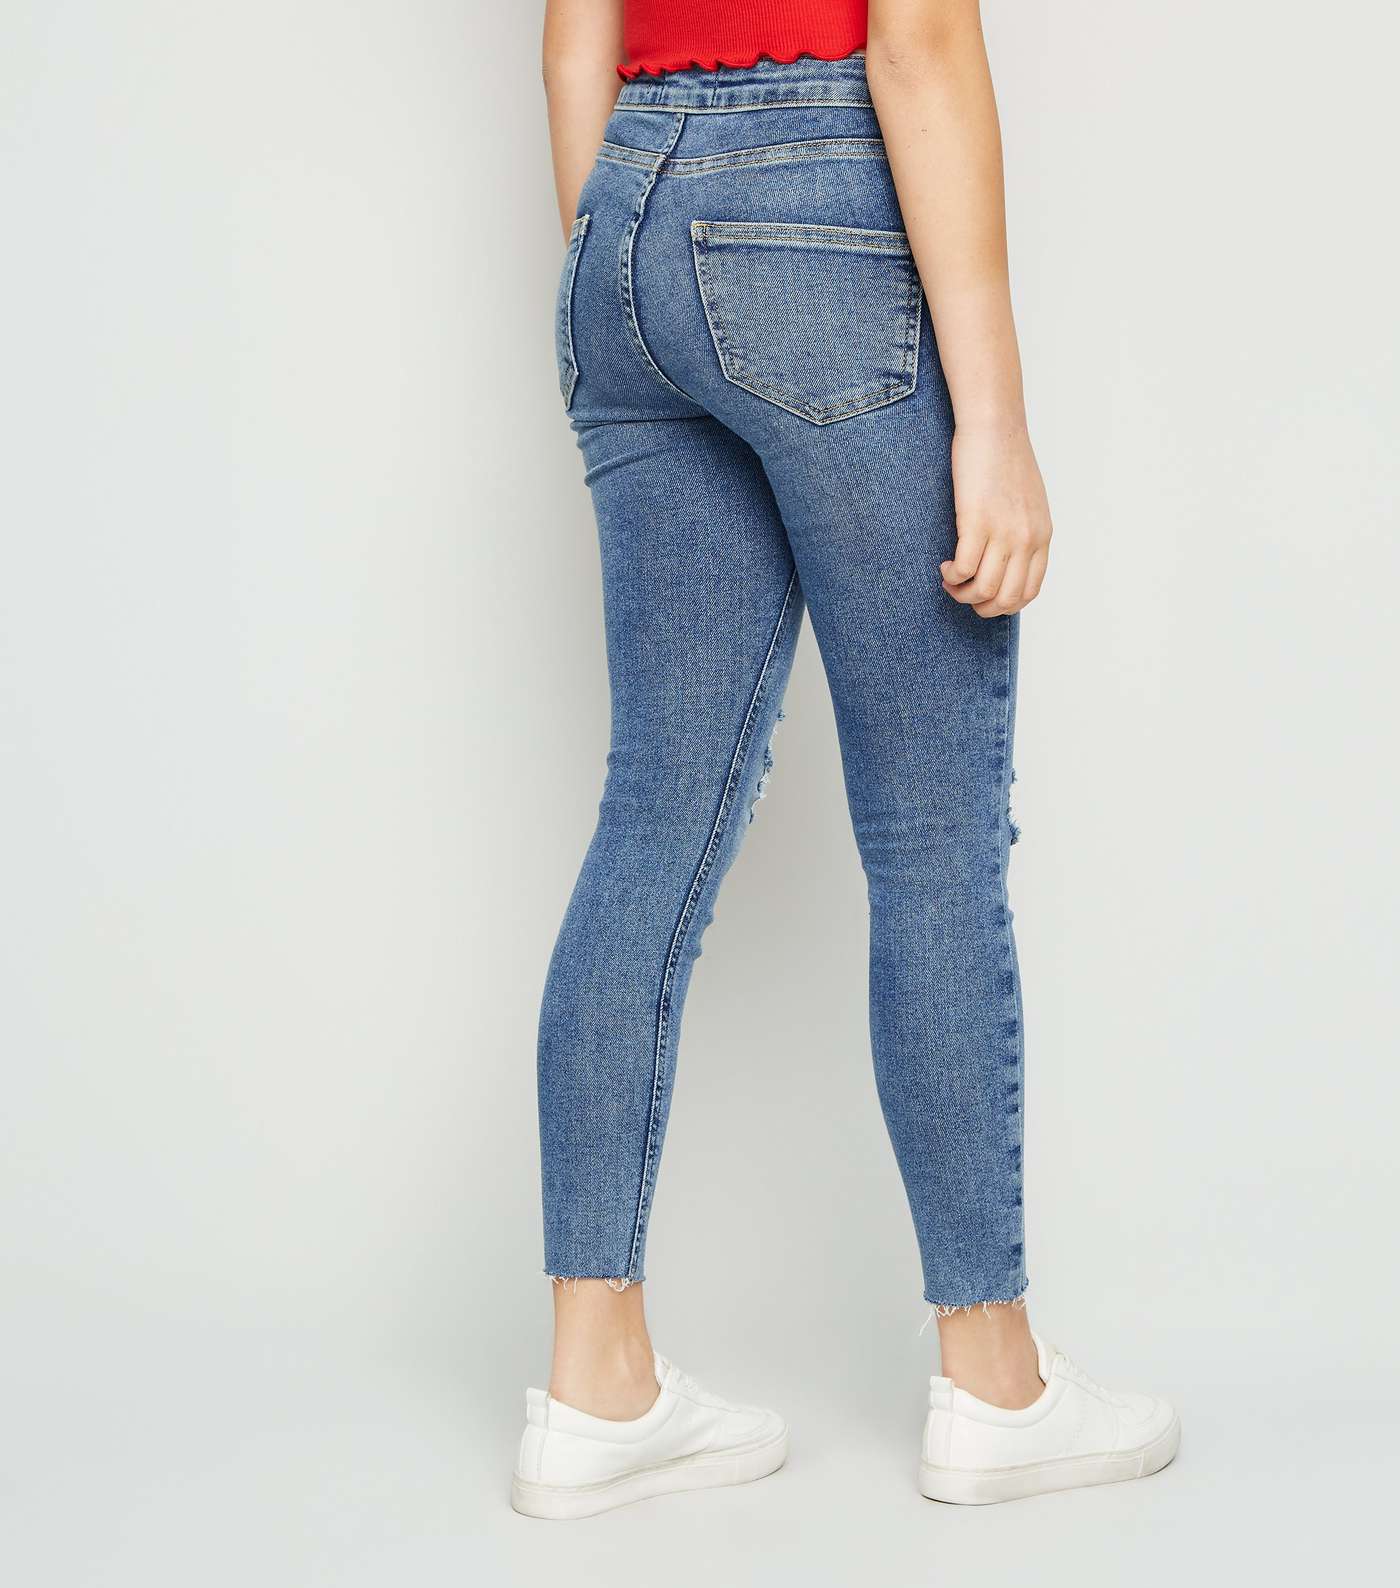 Girls Blue Mid Wash Ripped High Waist Super Skinny Jeans Image 3